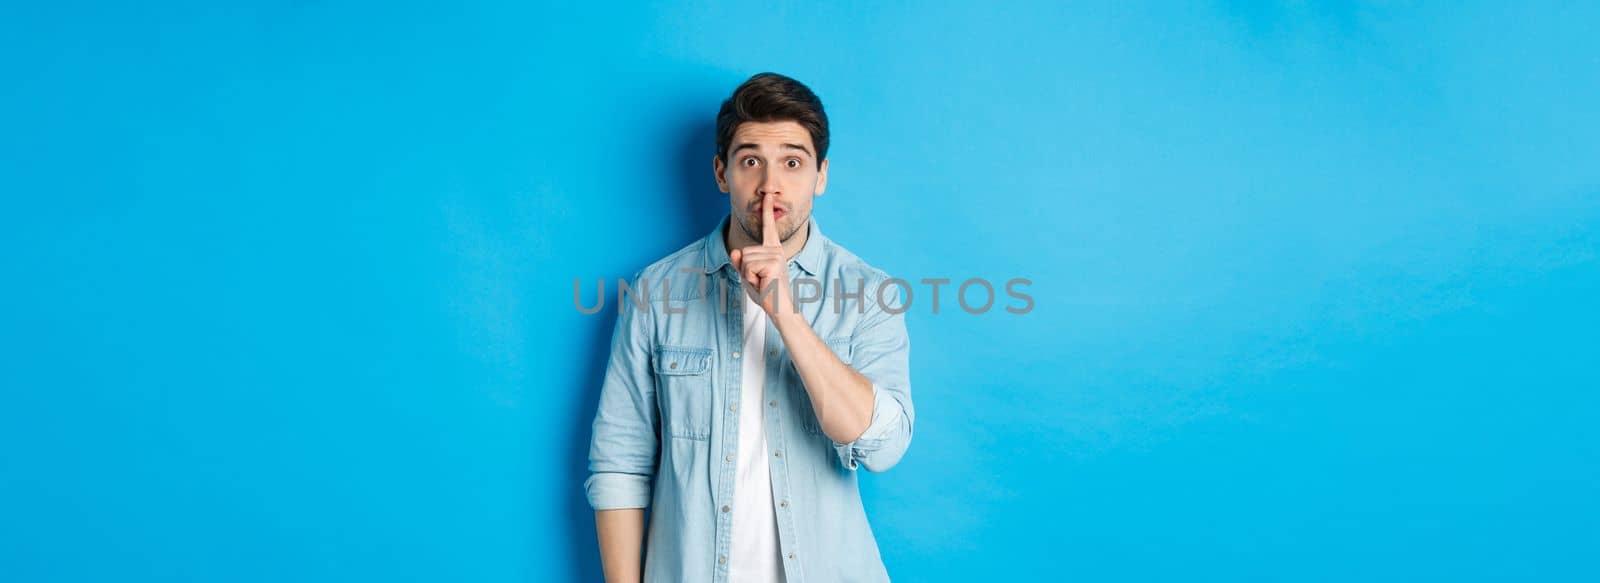 Portrait of excited man asking to keep quiet, showing hush taboo sign and looking nervously at camera, standing against blue background.